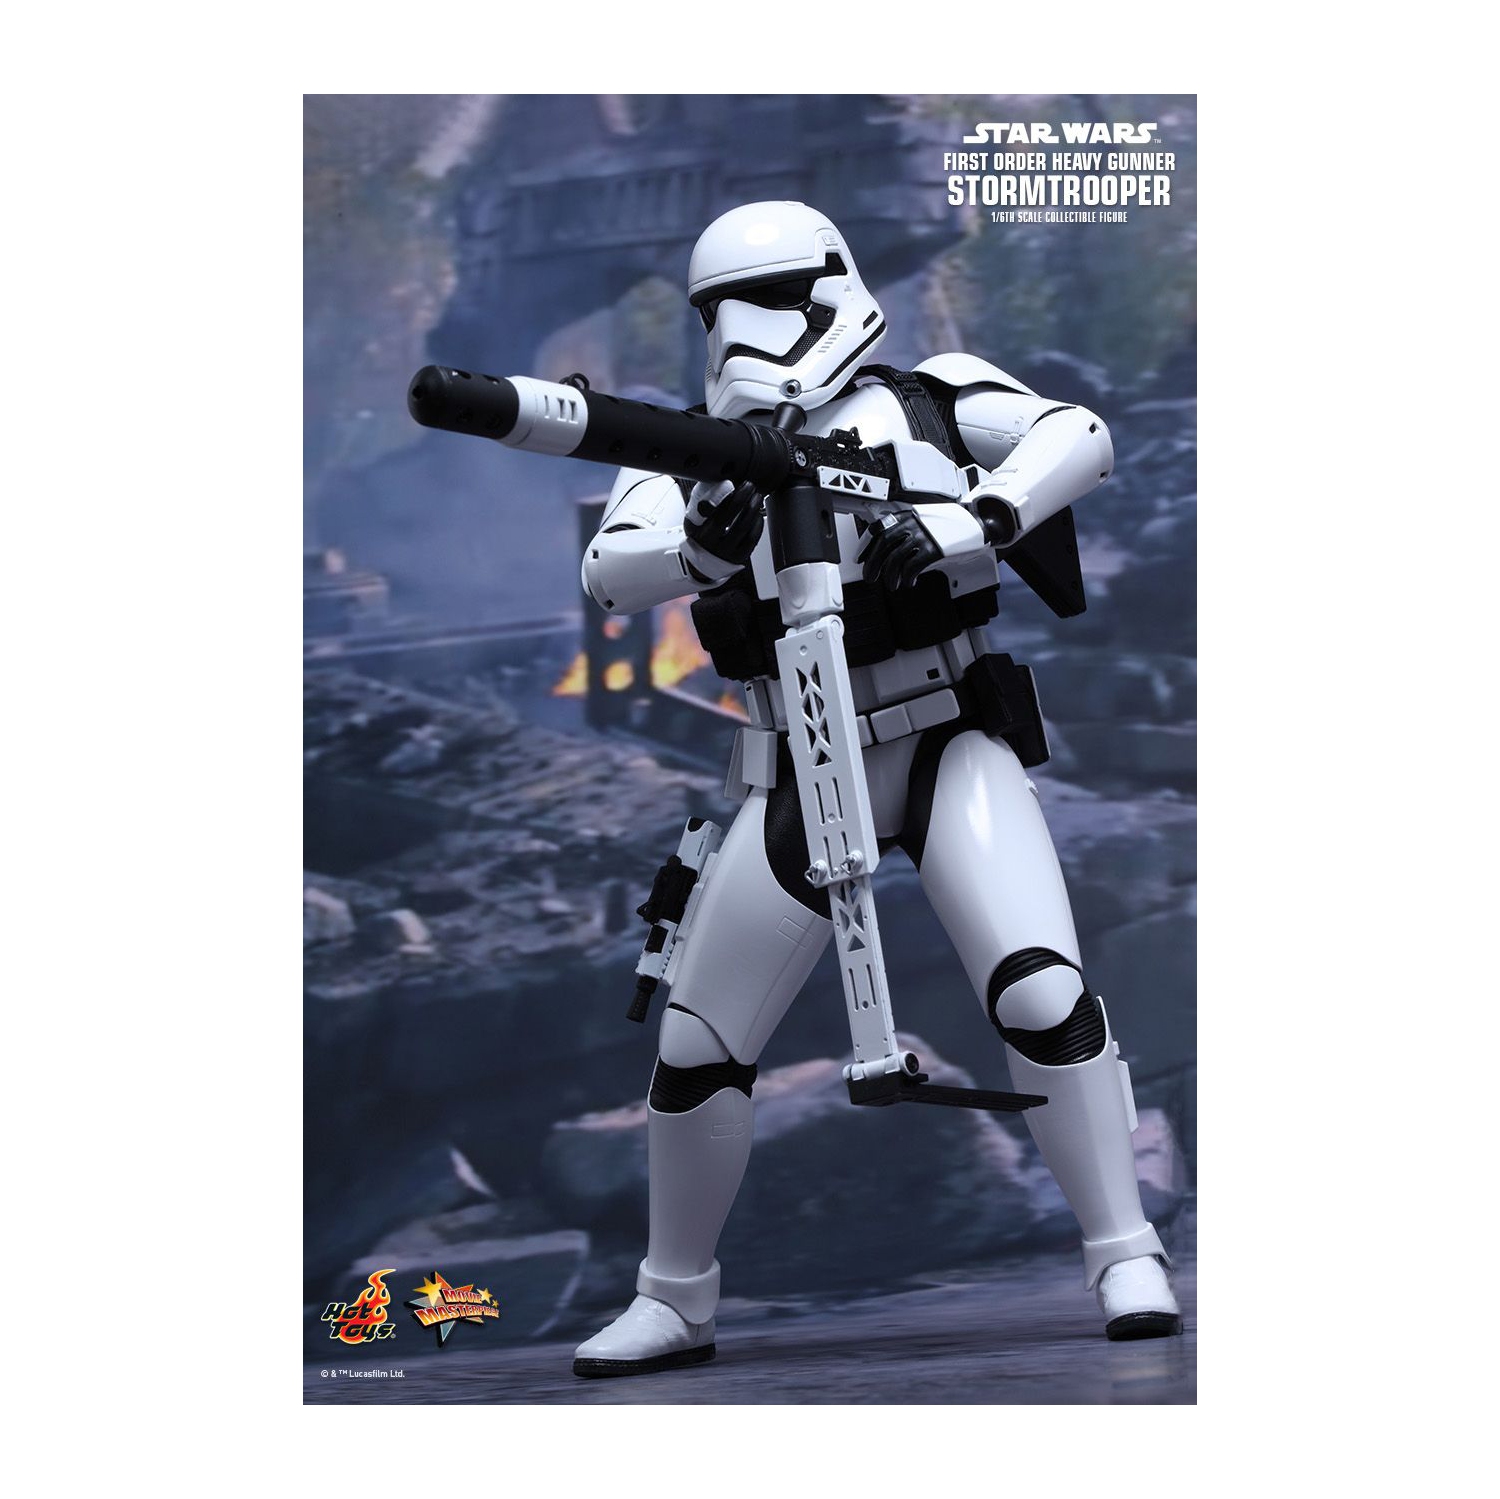 Star Wars The Force Awakens 12 Inch Action Figure MMS 1/6 Scale Series - First Order Heavy Gunner Stormtrooper Hot Toys